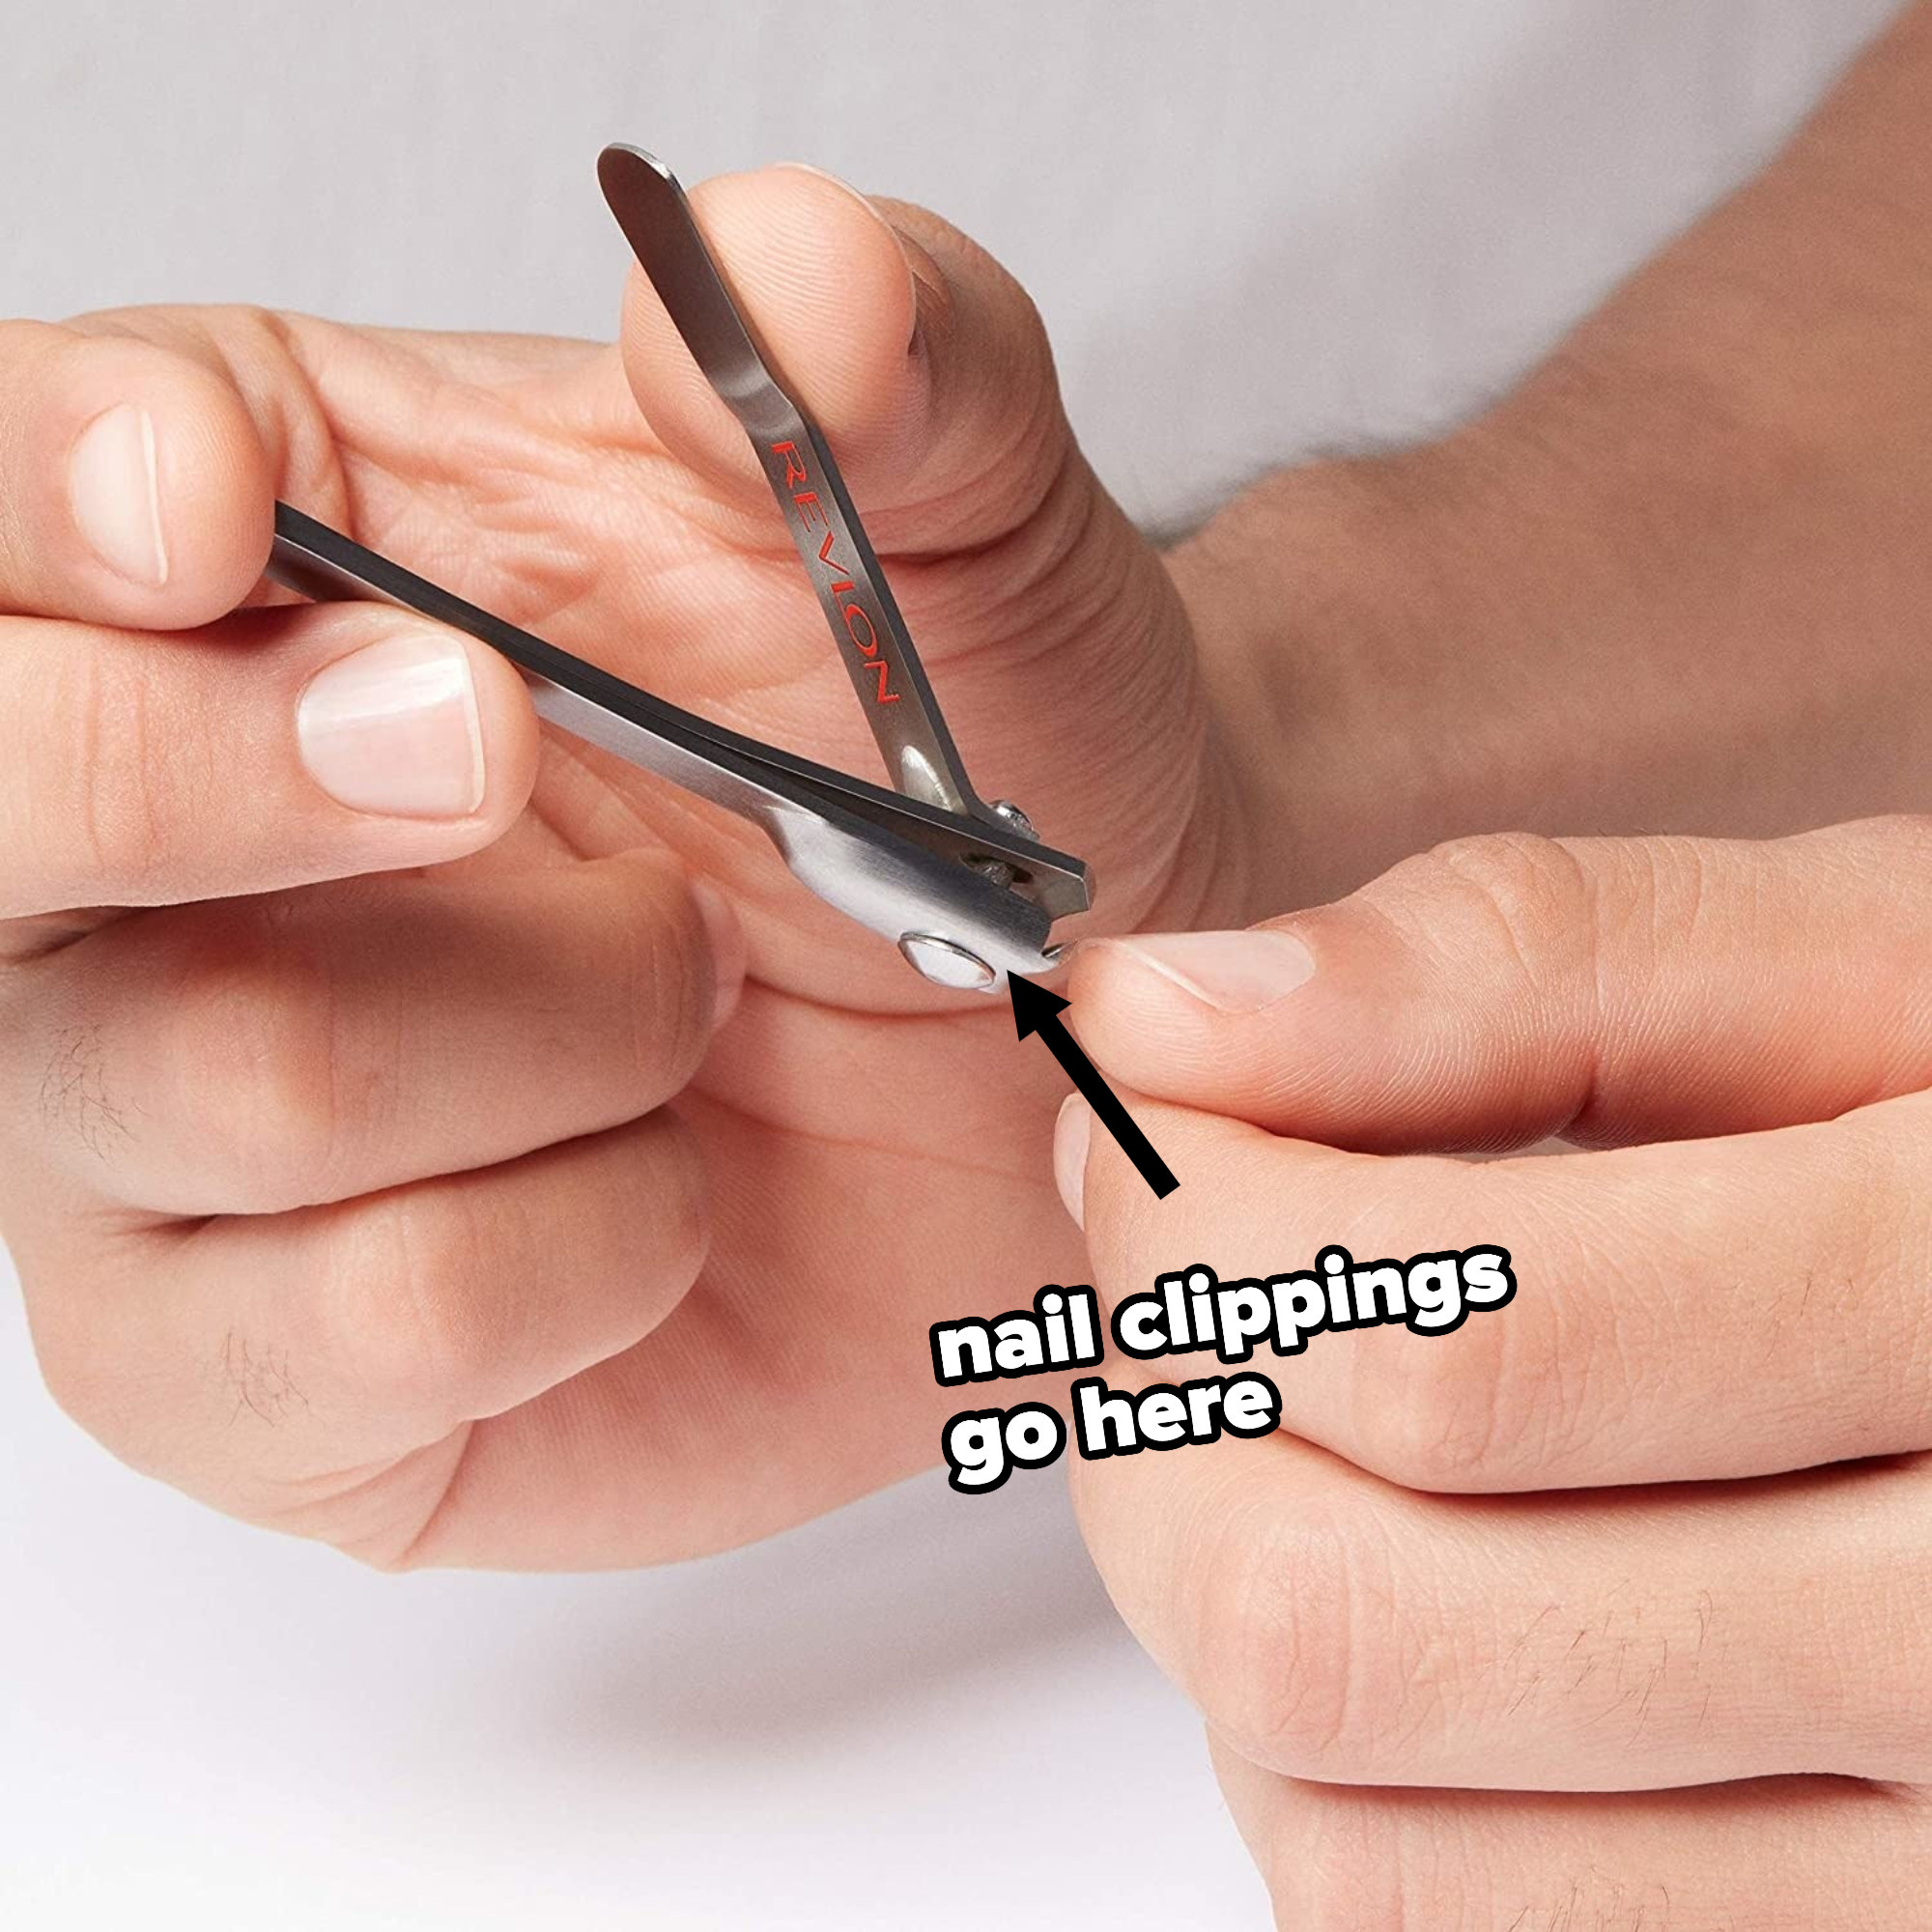 someone using the clippers, with an arrow and text indicating where the nail clippings will go